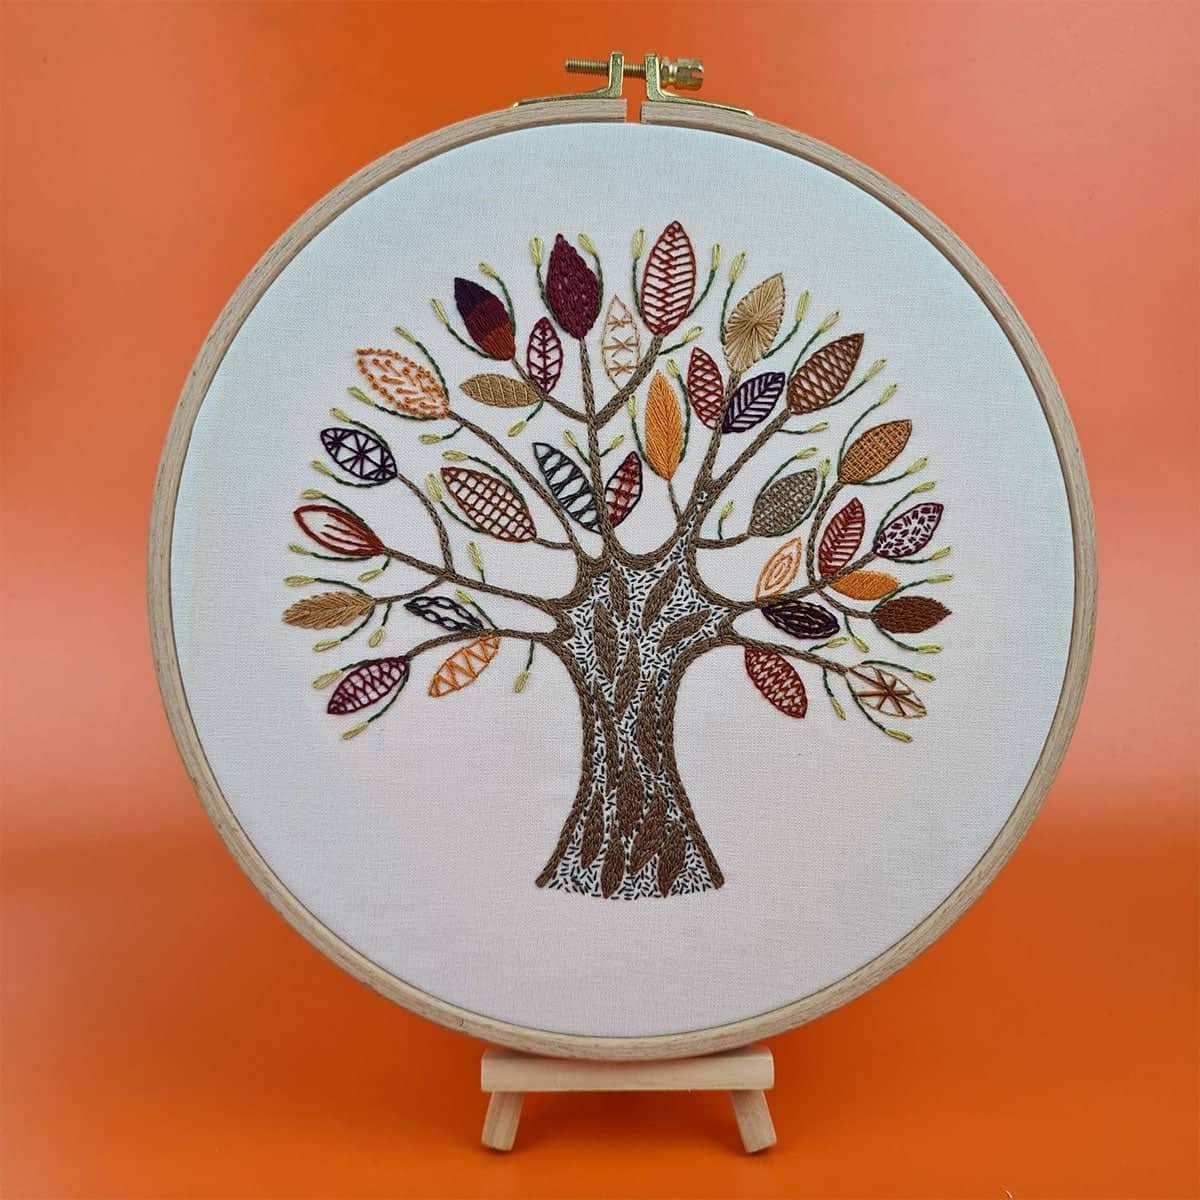 Stitch Fun with Leaves Hand Embroidery Pattern , PDF Download , StitchDoodles , Embroidery, embroidery hoop, embroidery hoop kit, Embroidery Kit, embroidery kit for adults, embroidery kit fro beginners, embroidery kits for beginners, embroidery pattern, hand embroidery, hand embroidery fabric, hand embroidery seat frame, modern embroidery kits, nurge embroidery hoop, PDF pattern, Printed Pattern , StitchDoodles , shop.stitchdoodles.com